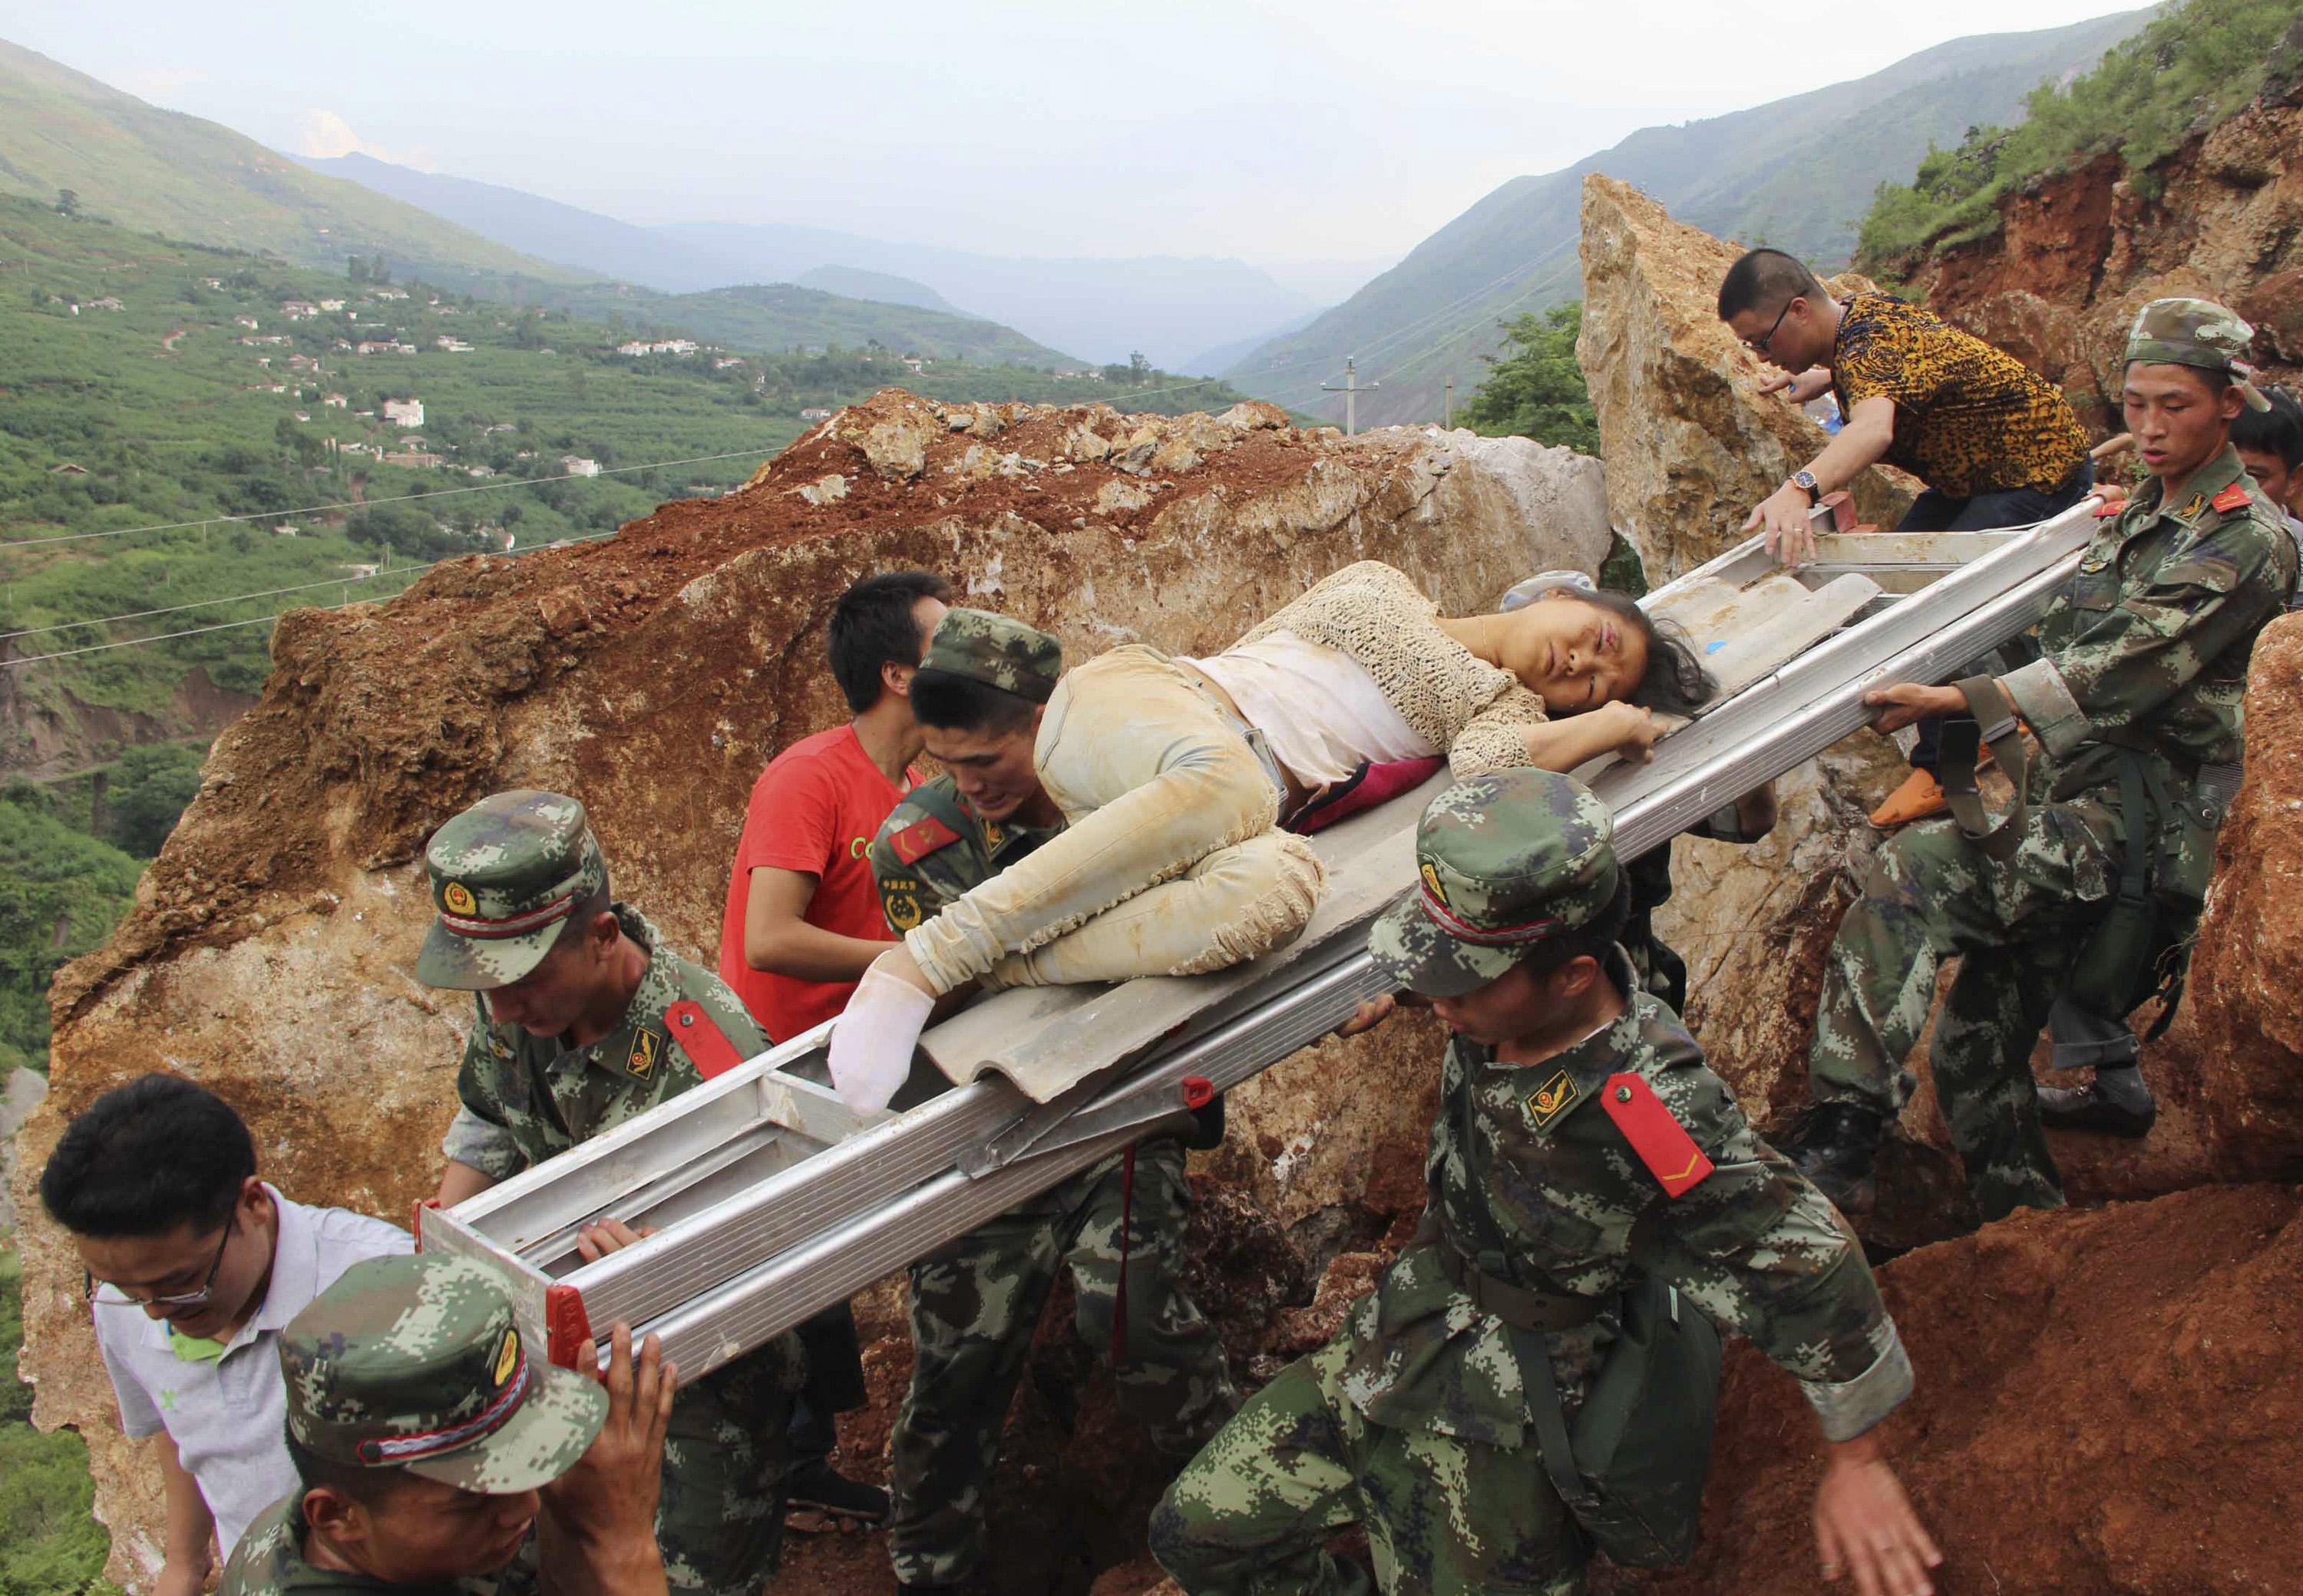 An injured woman is carried down a mountain on a ladder by rescue workers after a deadly earthquake hit Longtoushan town on Sunday, Ludian county, Zhaotong, Yunnan province, August 3, 2014. Picture taken August 3, 2014. (Photo: Reuters)